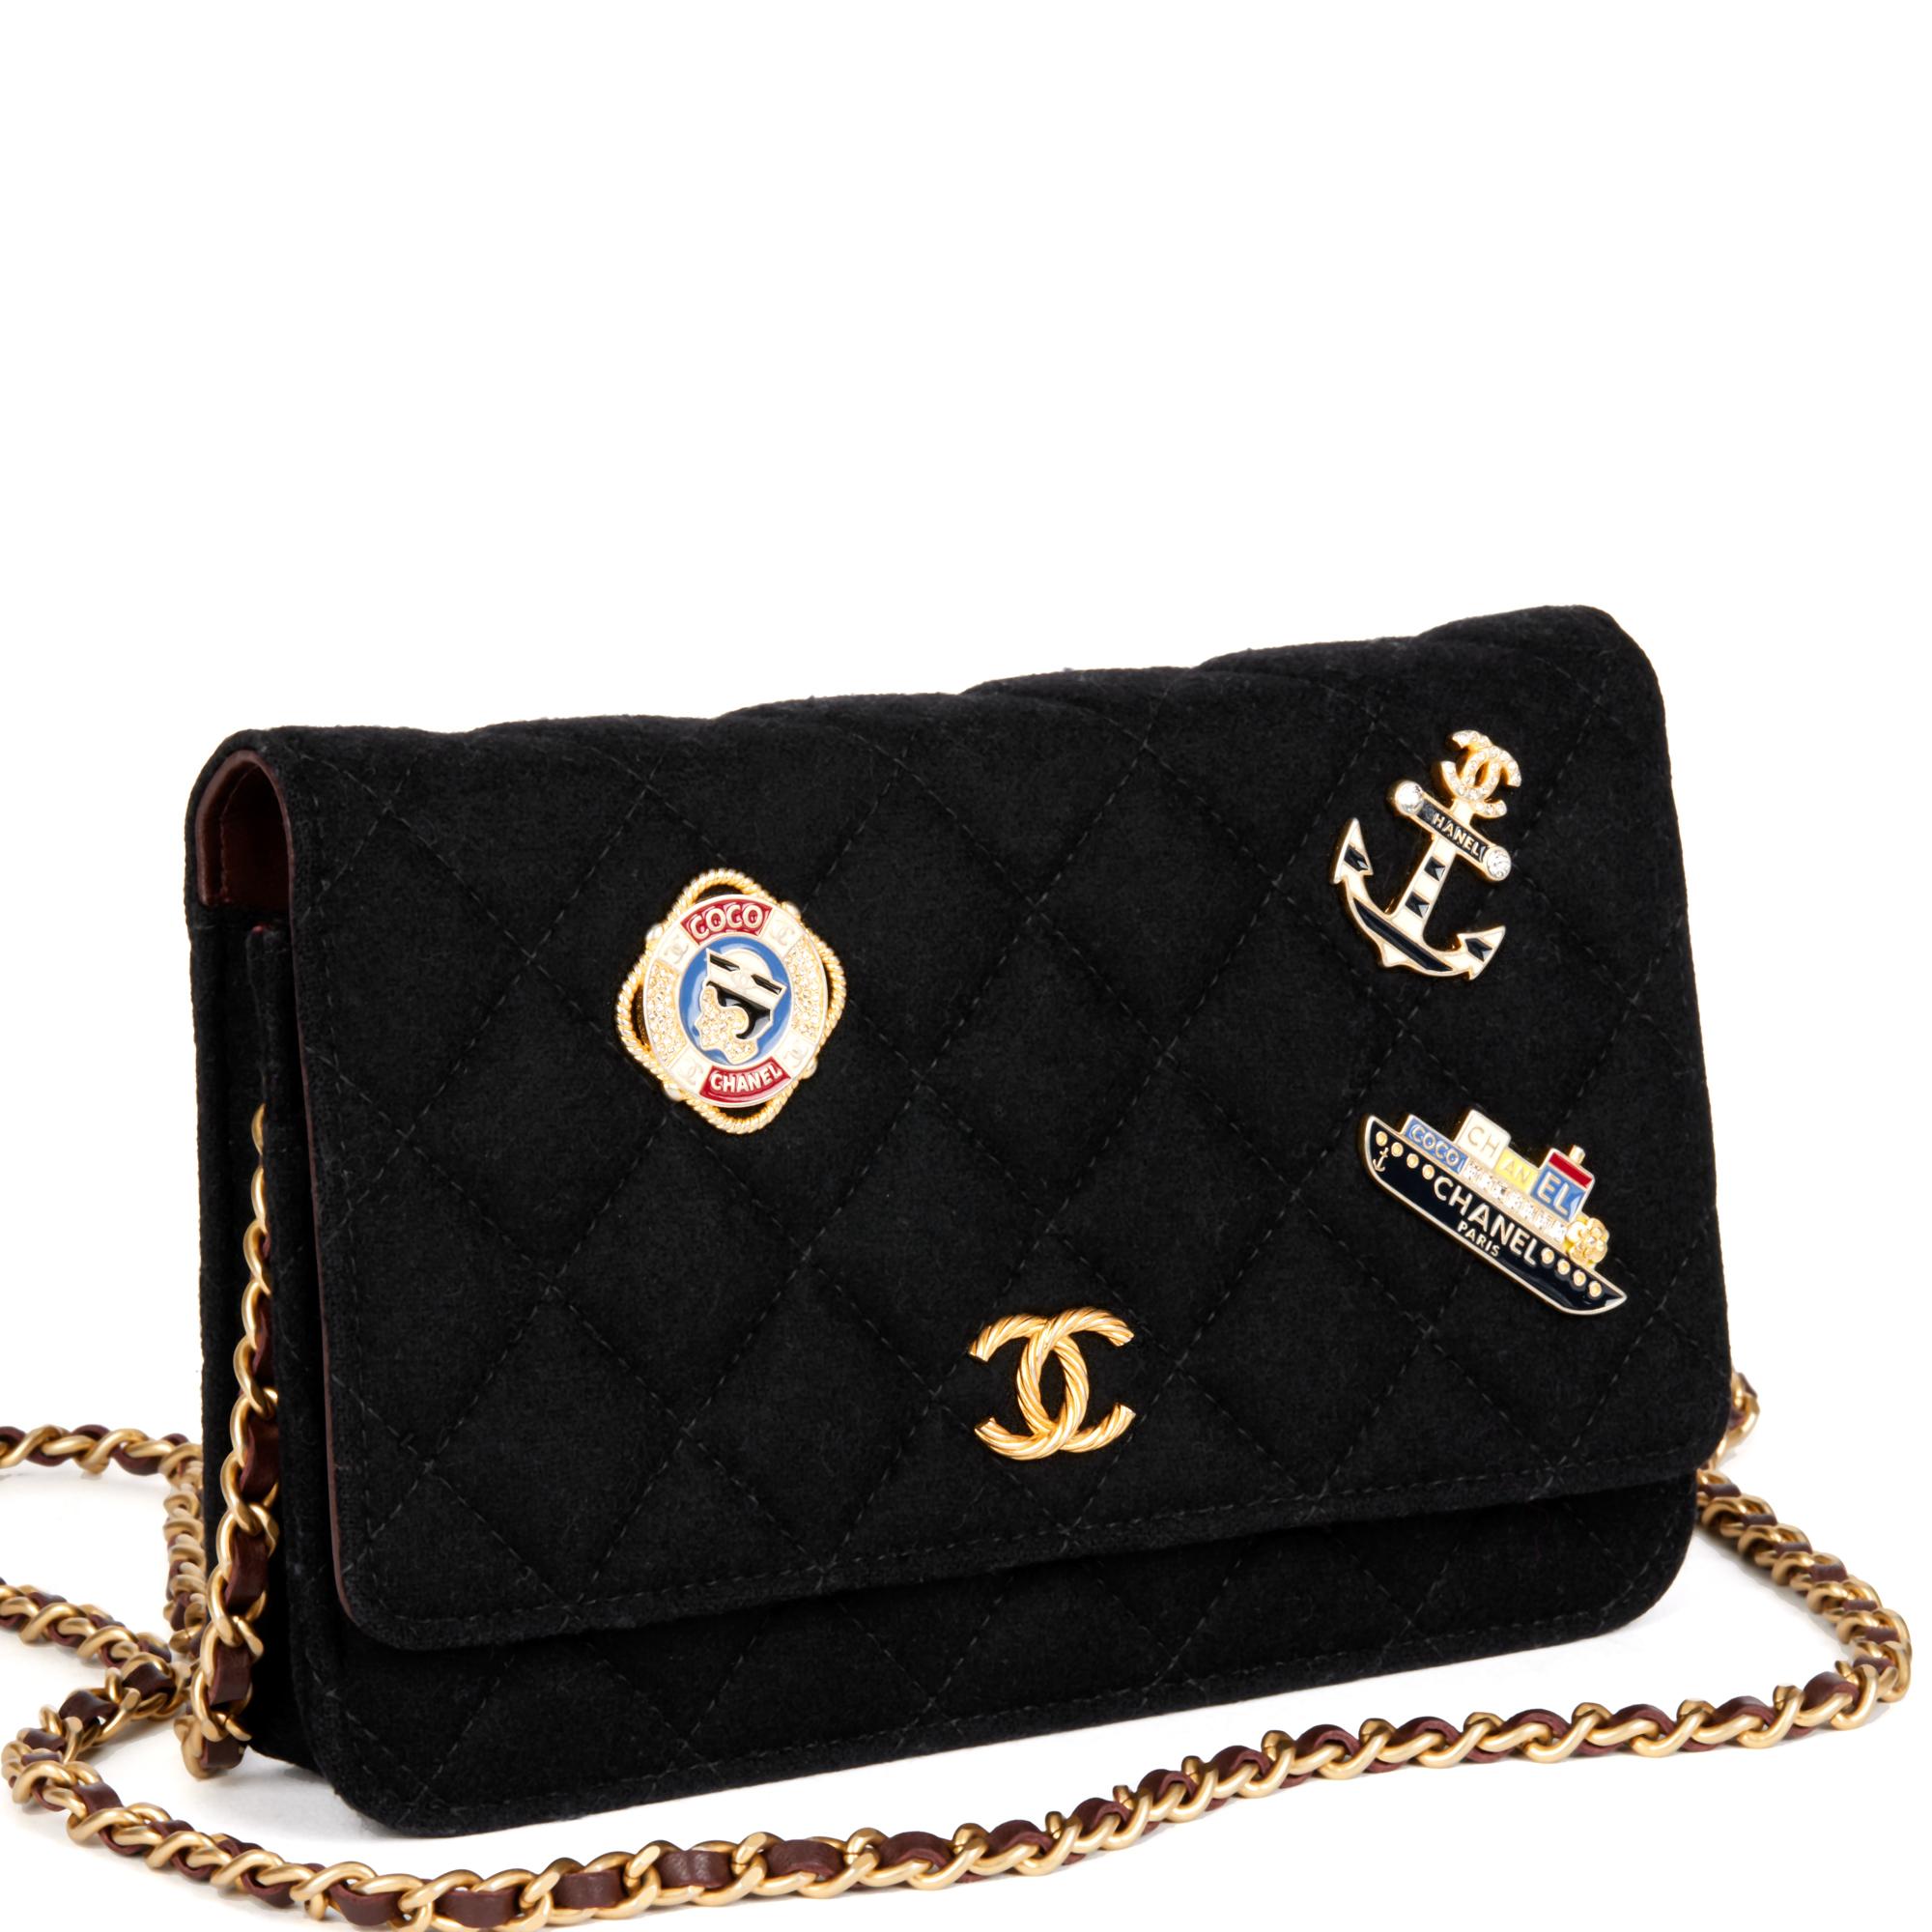 CHANEL
Black Quilted Felt Cruise Charms Wallet-on-Chain WOC

Xupes Reference: CB585
Serial Number: 26100005
Age (Circa): 2018
Accompanied By: Chanel Dust Bag, Authenticity Card
Authenticity Details: Authenticity Card, Serial Sticker (Made in